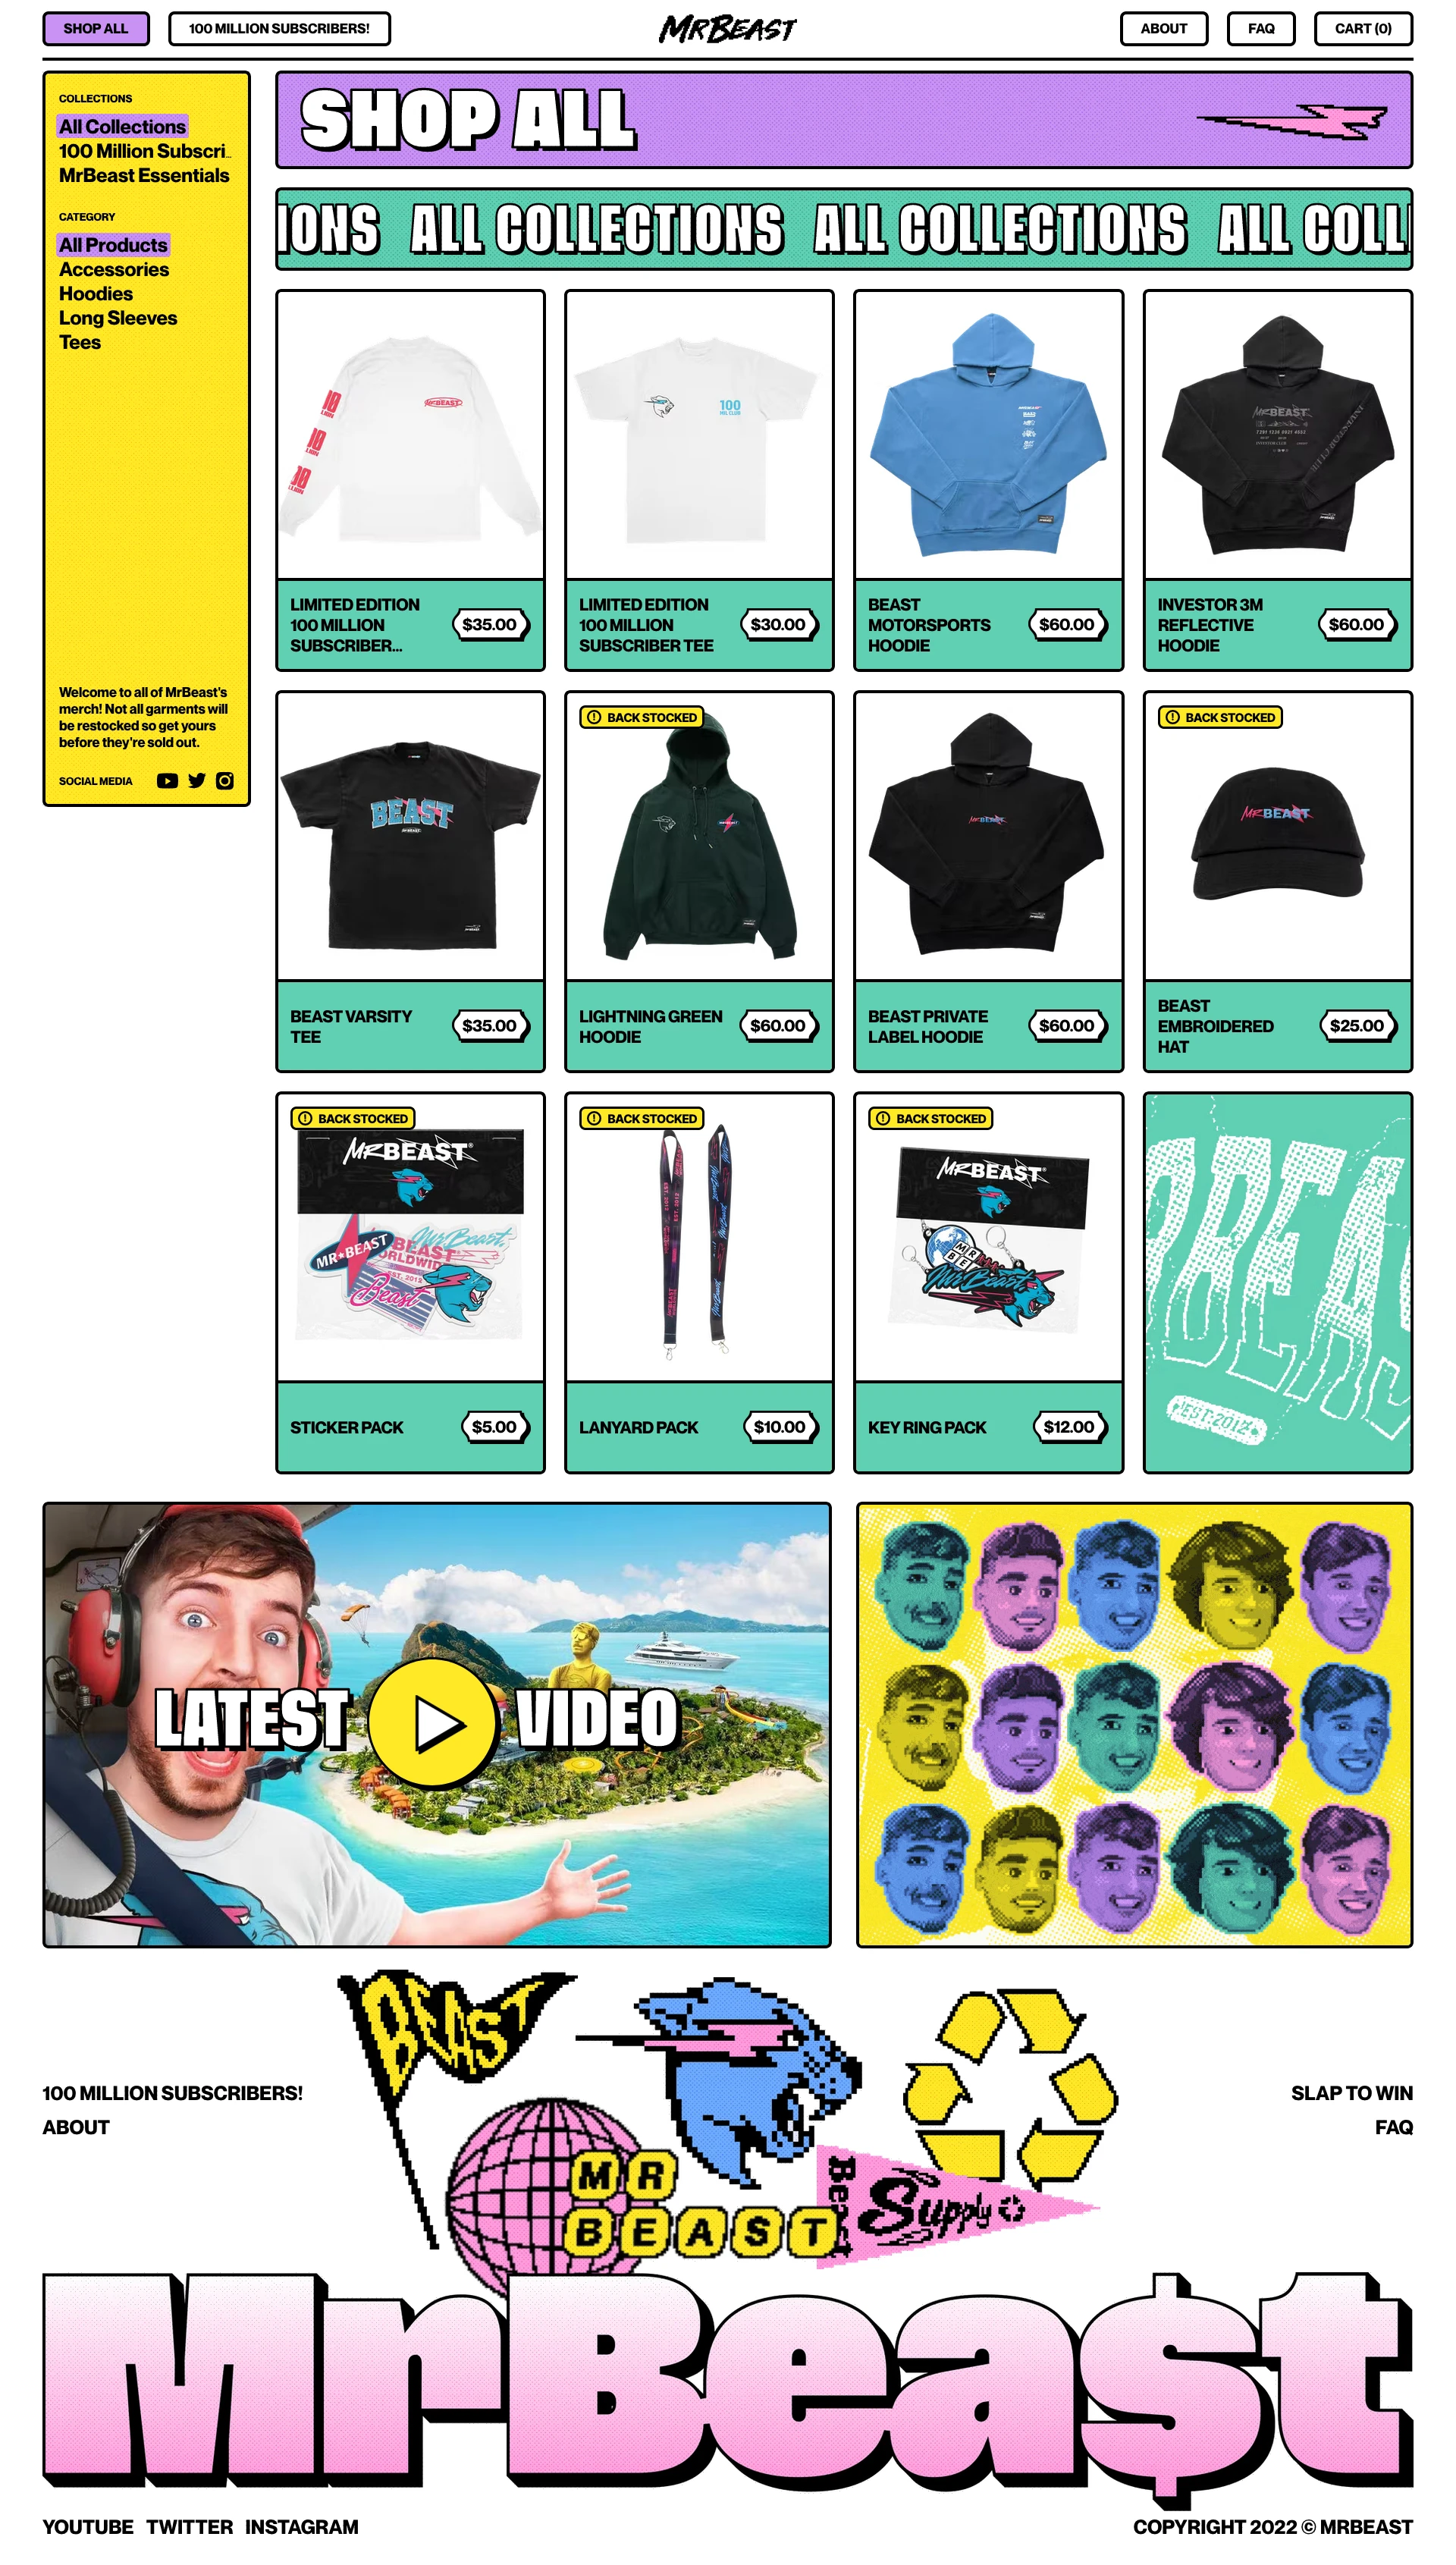 ShopMrBeast Landing Page Example: Jimmy Donaldson, more commonly known as MrBeast, is an American YouTuber from Greenville, North Carolina. He has been making videos for almost 10 years now, branching into all kinds of content. He has forged a YouTube legacy around his extreme stunt videos and overwhelming generosity.